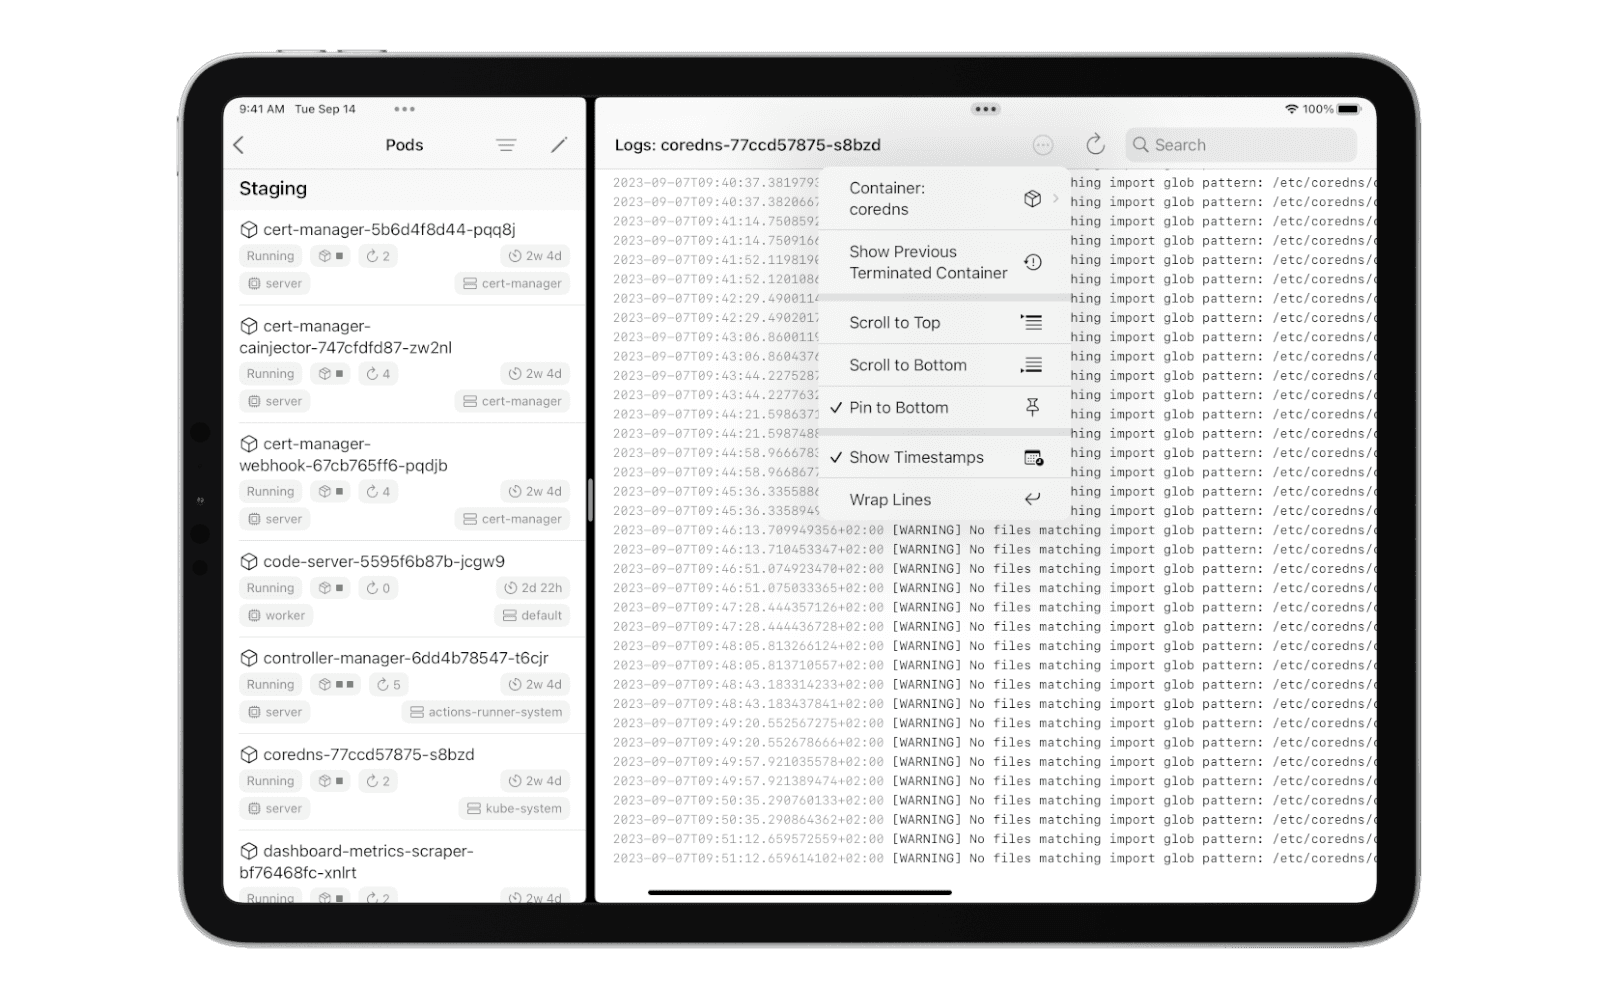 An iPad showing the app's pod list on the left and a pod's logs on the right in split view